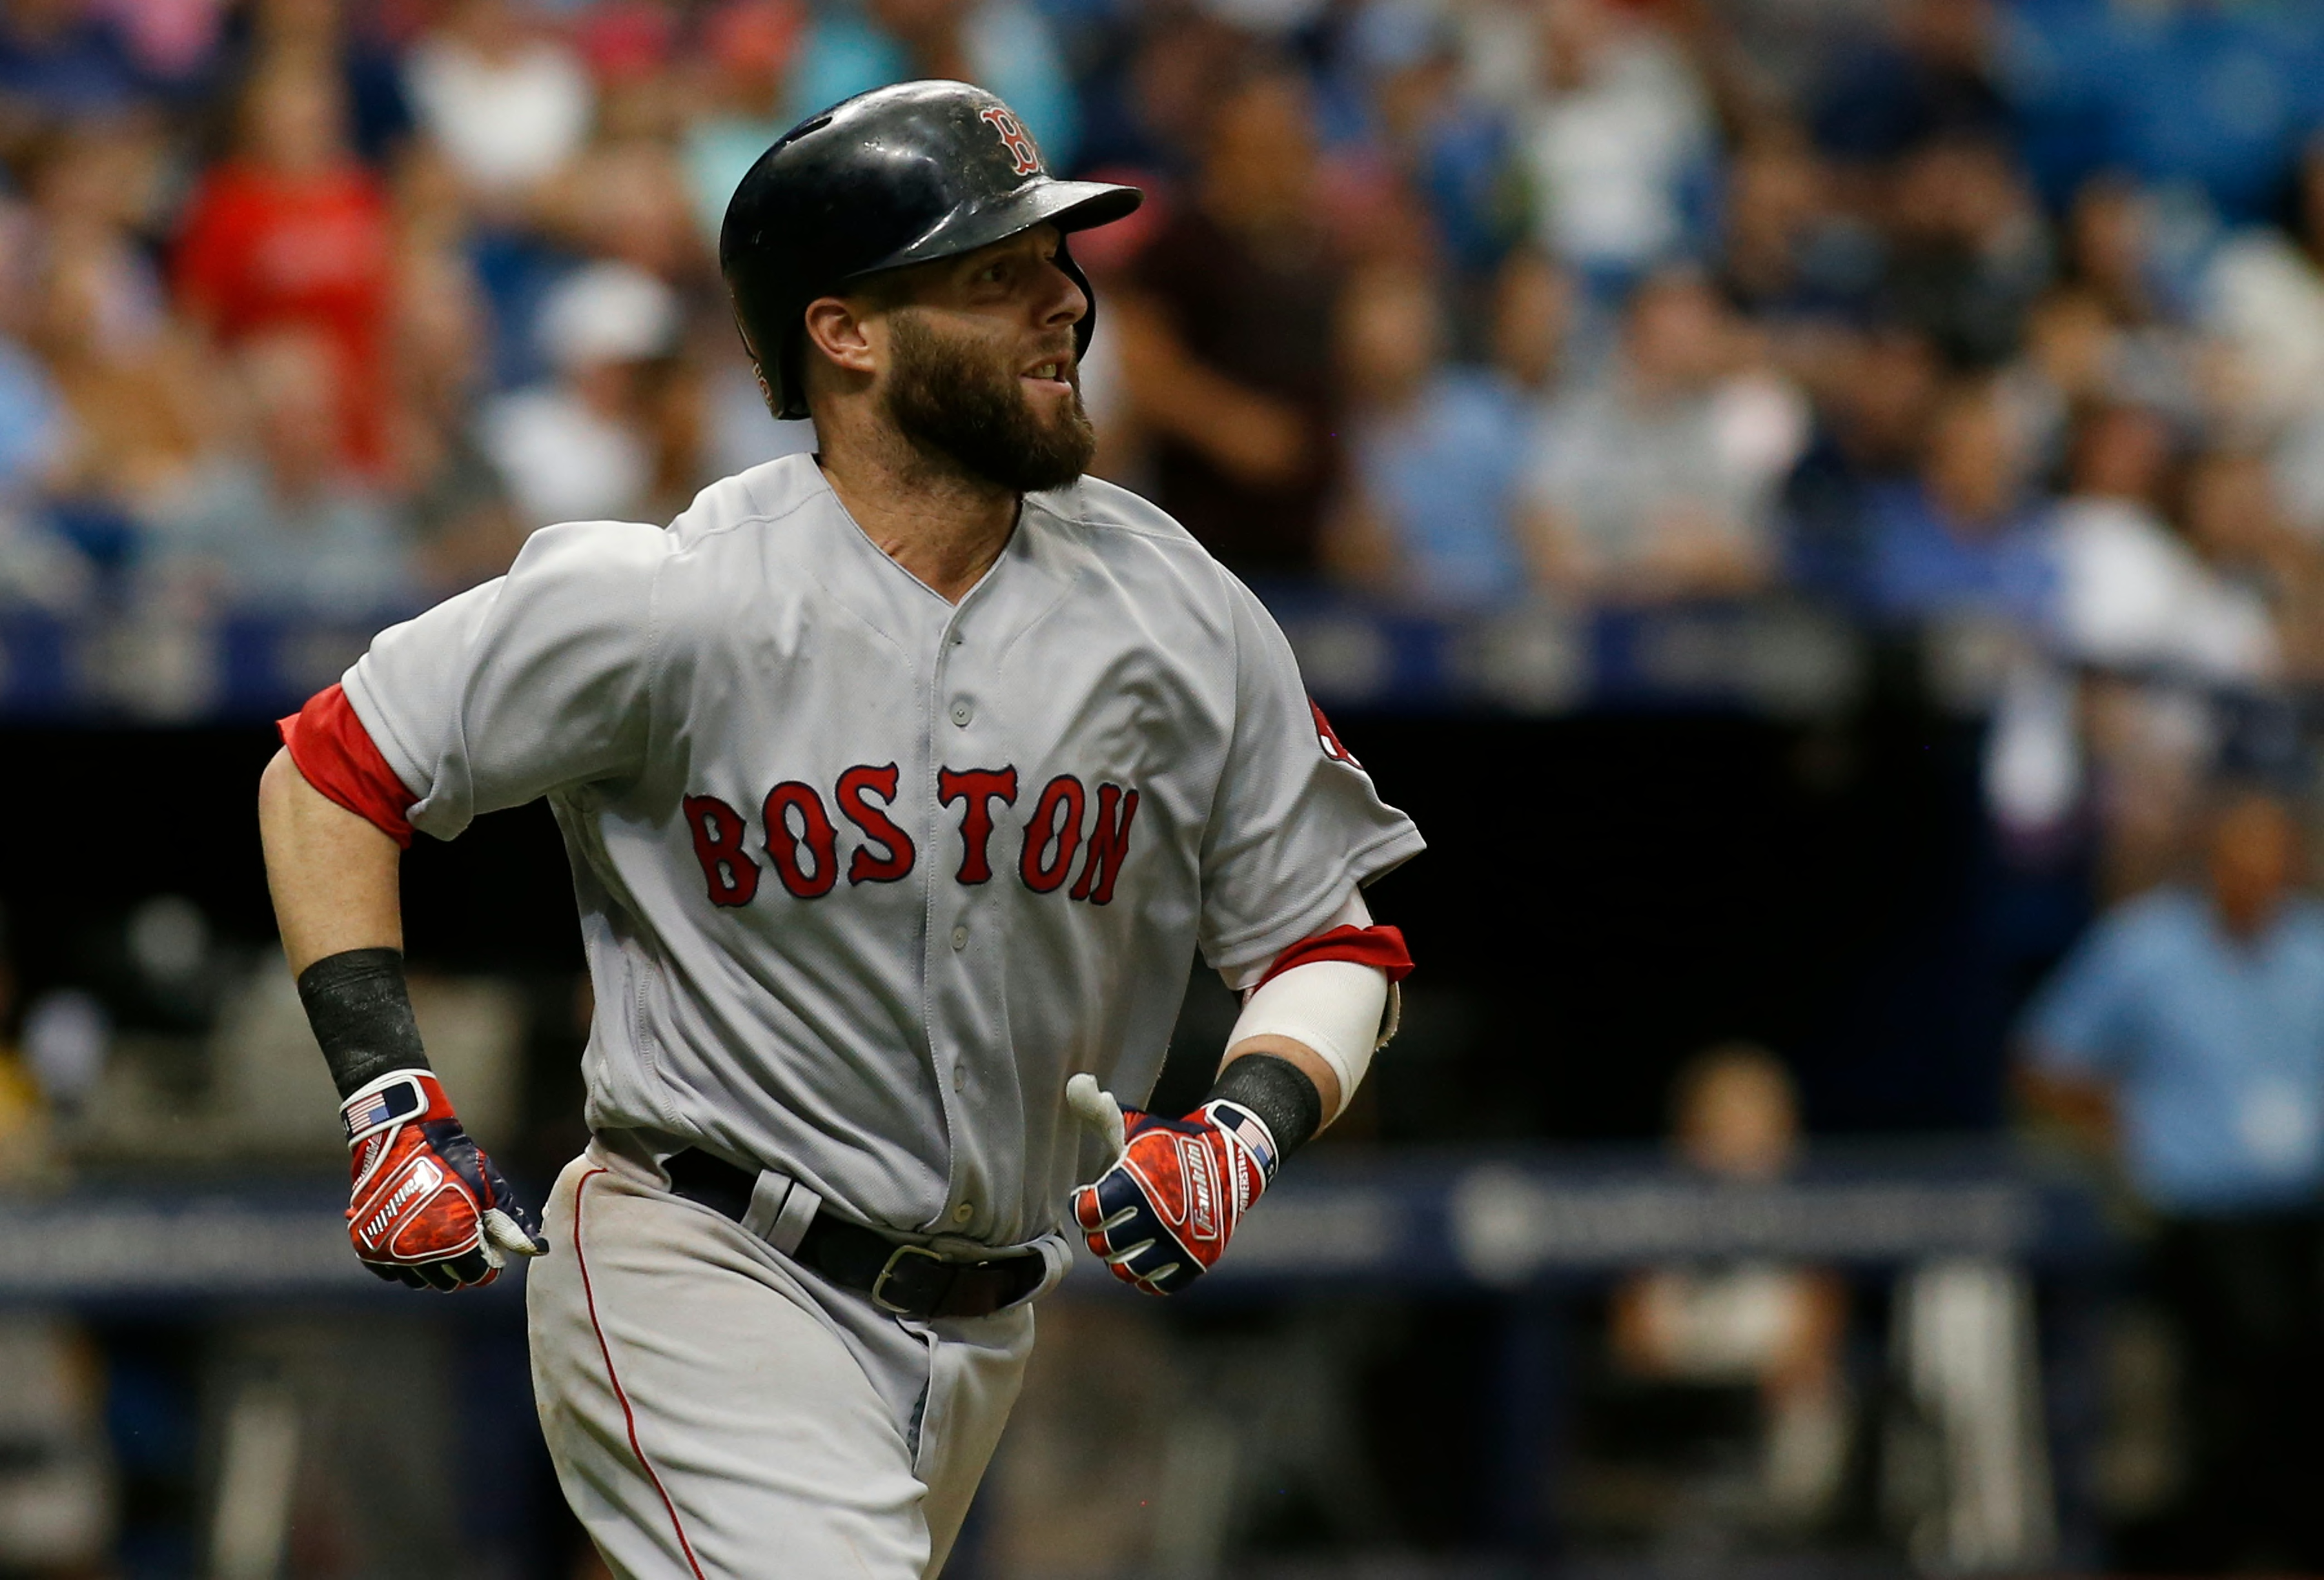 Boston Red Sox leader Dustin Pedroia placed on 10-day disabled list